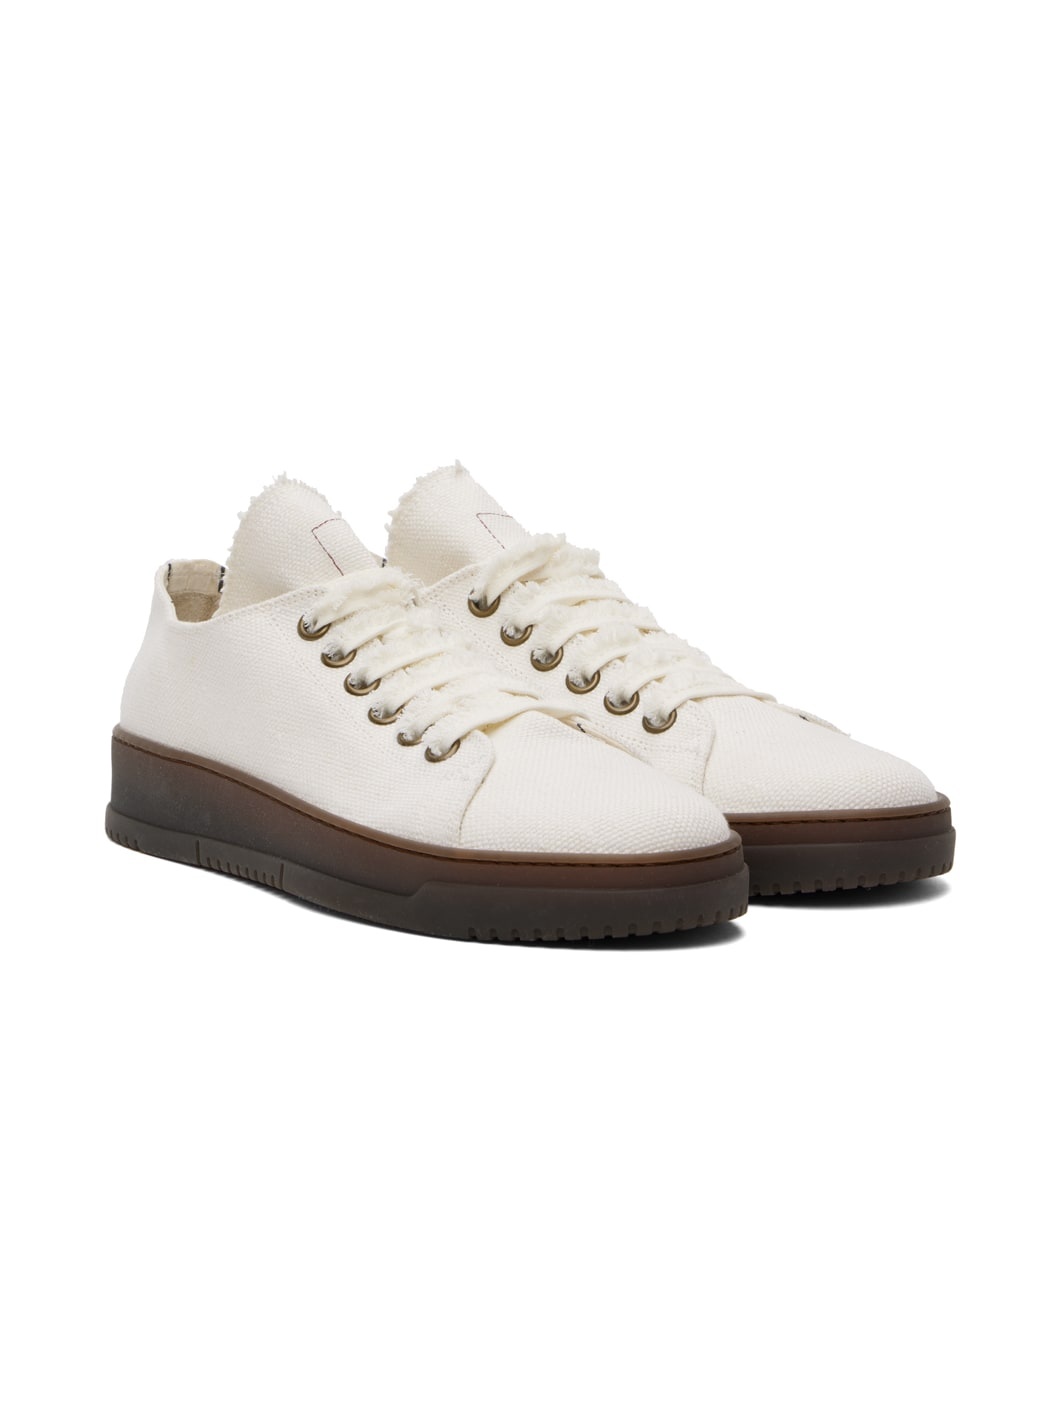 Off-White Tennis Sneakers - 4